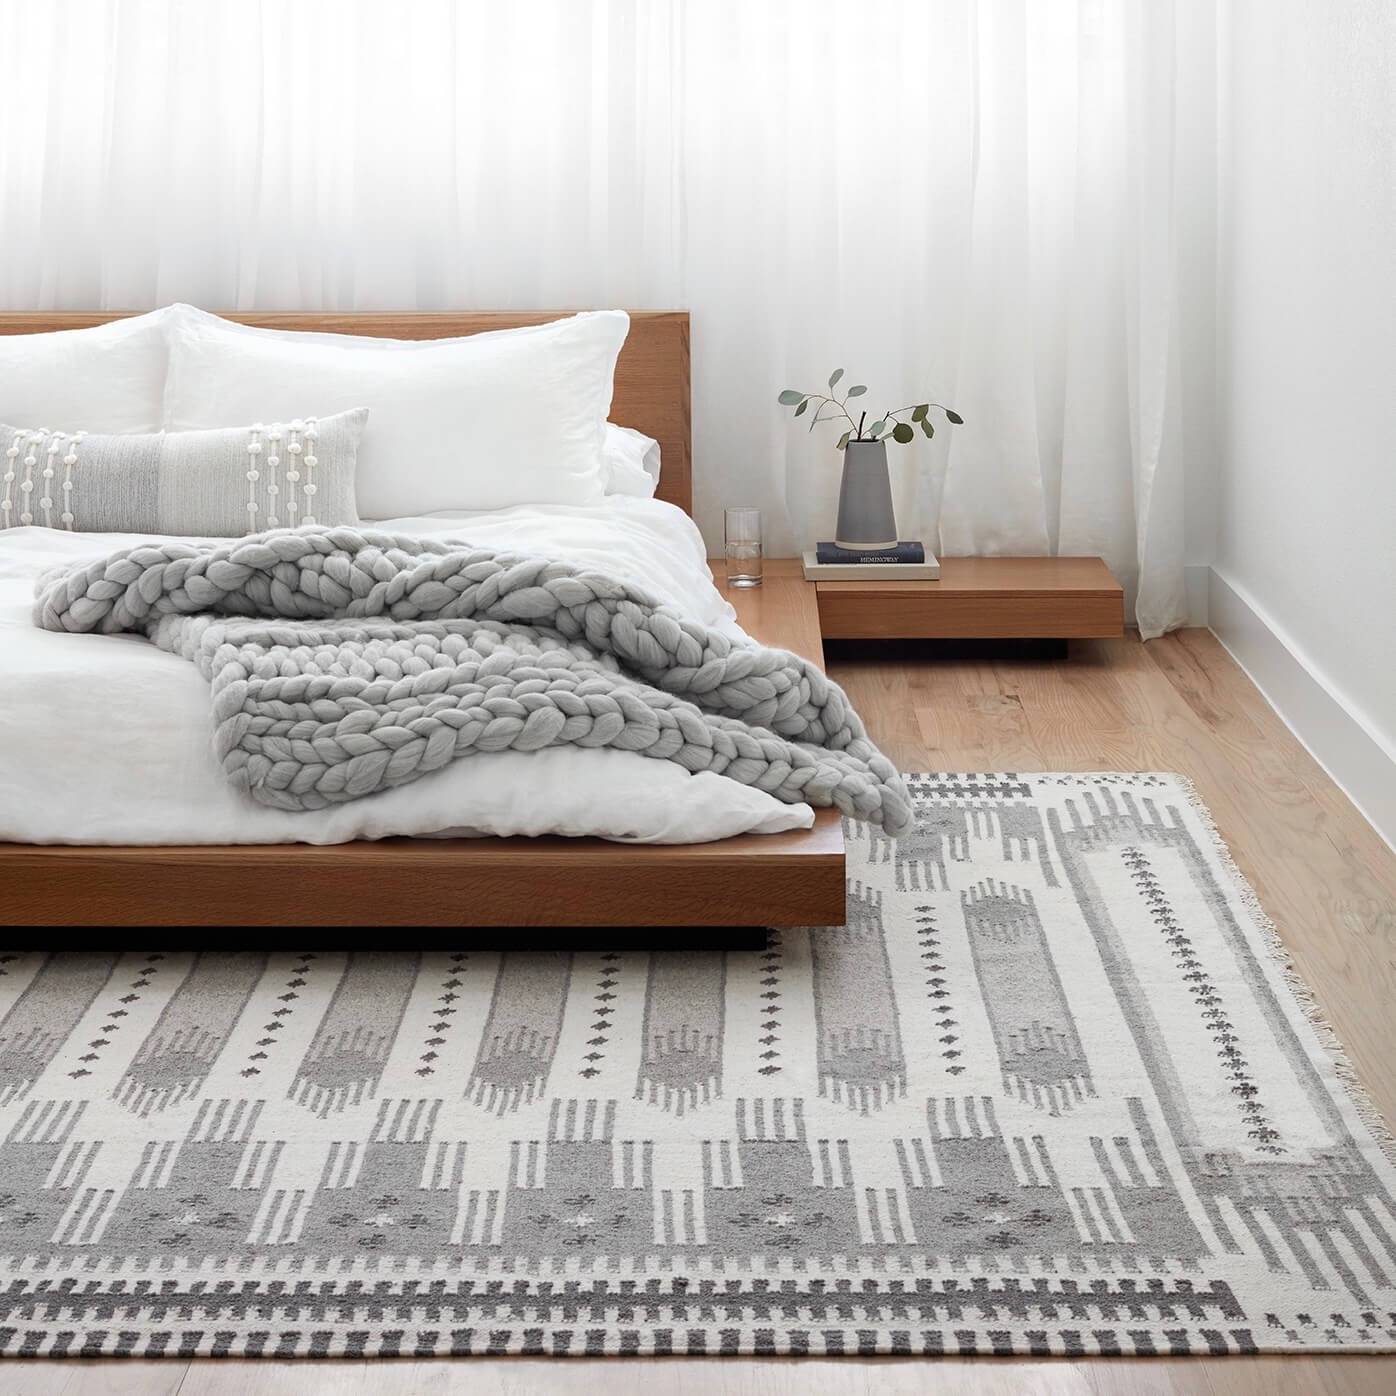 The Citizenry Asha Handwoven Area Rug | 6' x 9' | Grey - Image 2